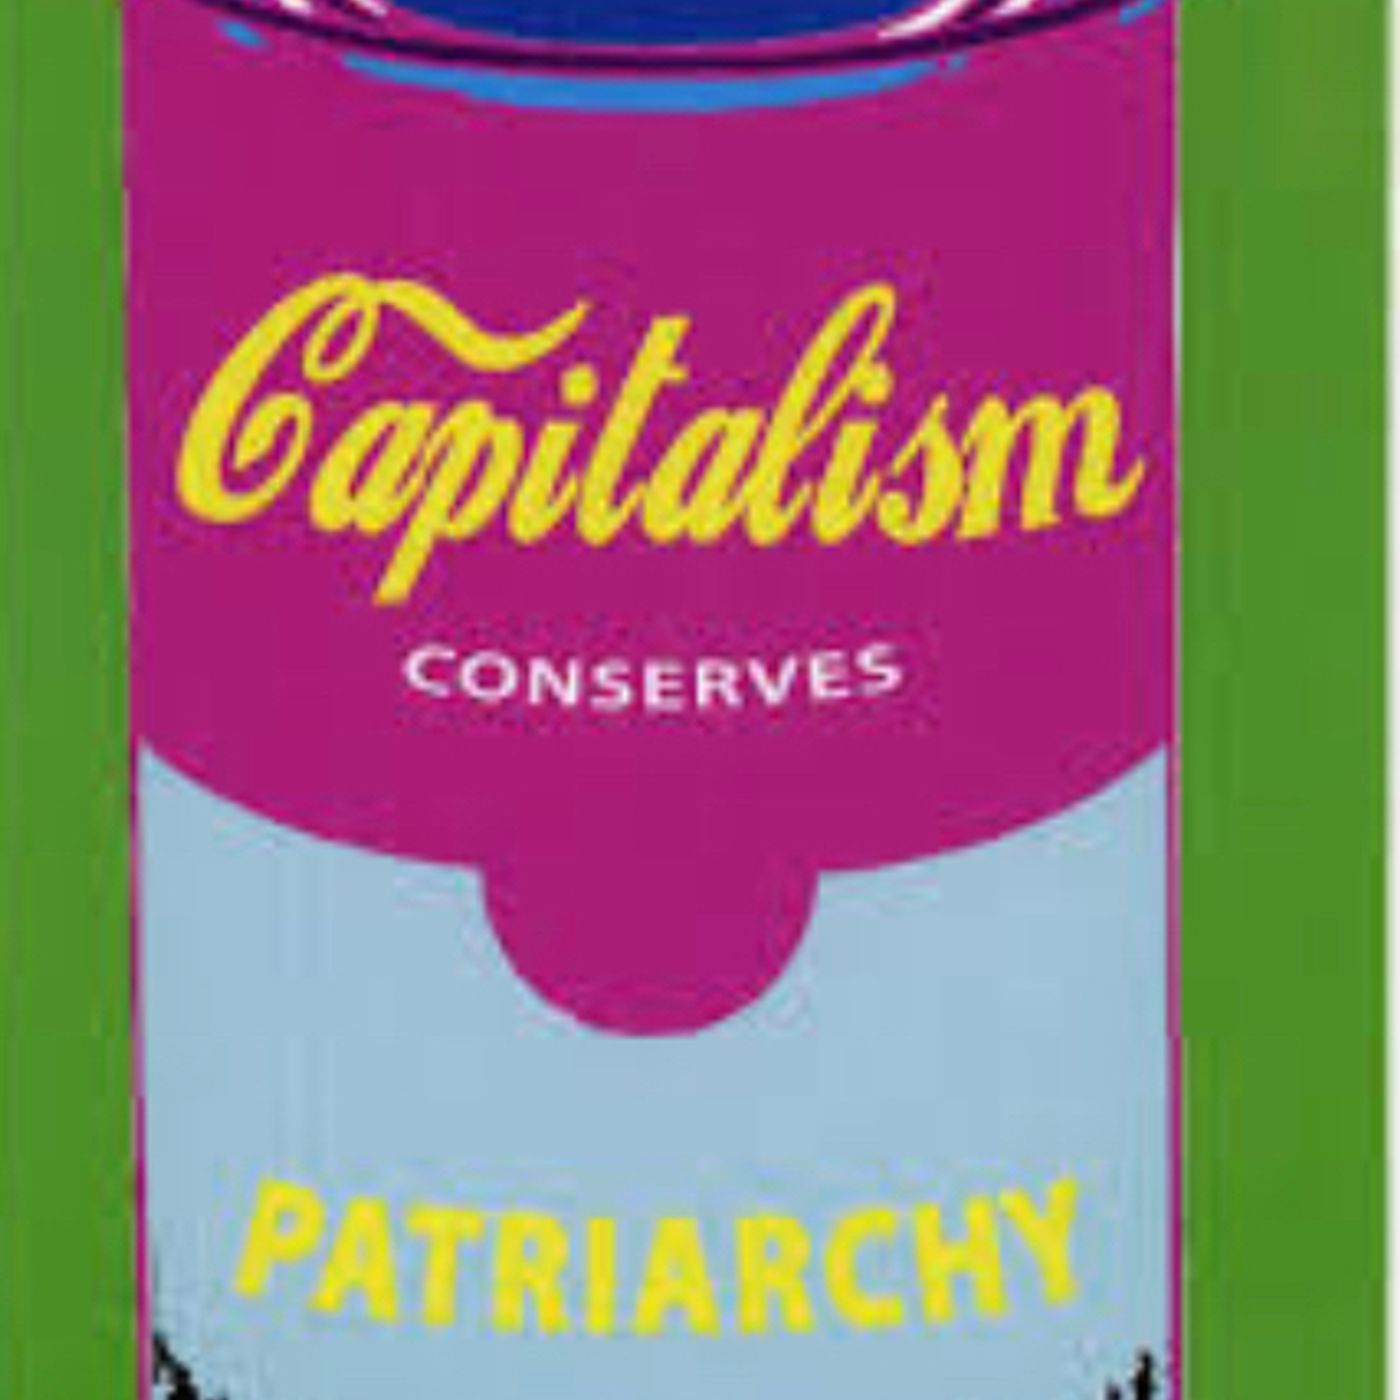 The relationship between Capitalism and the Patriarchy (STUDENT TAKEOVER)